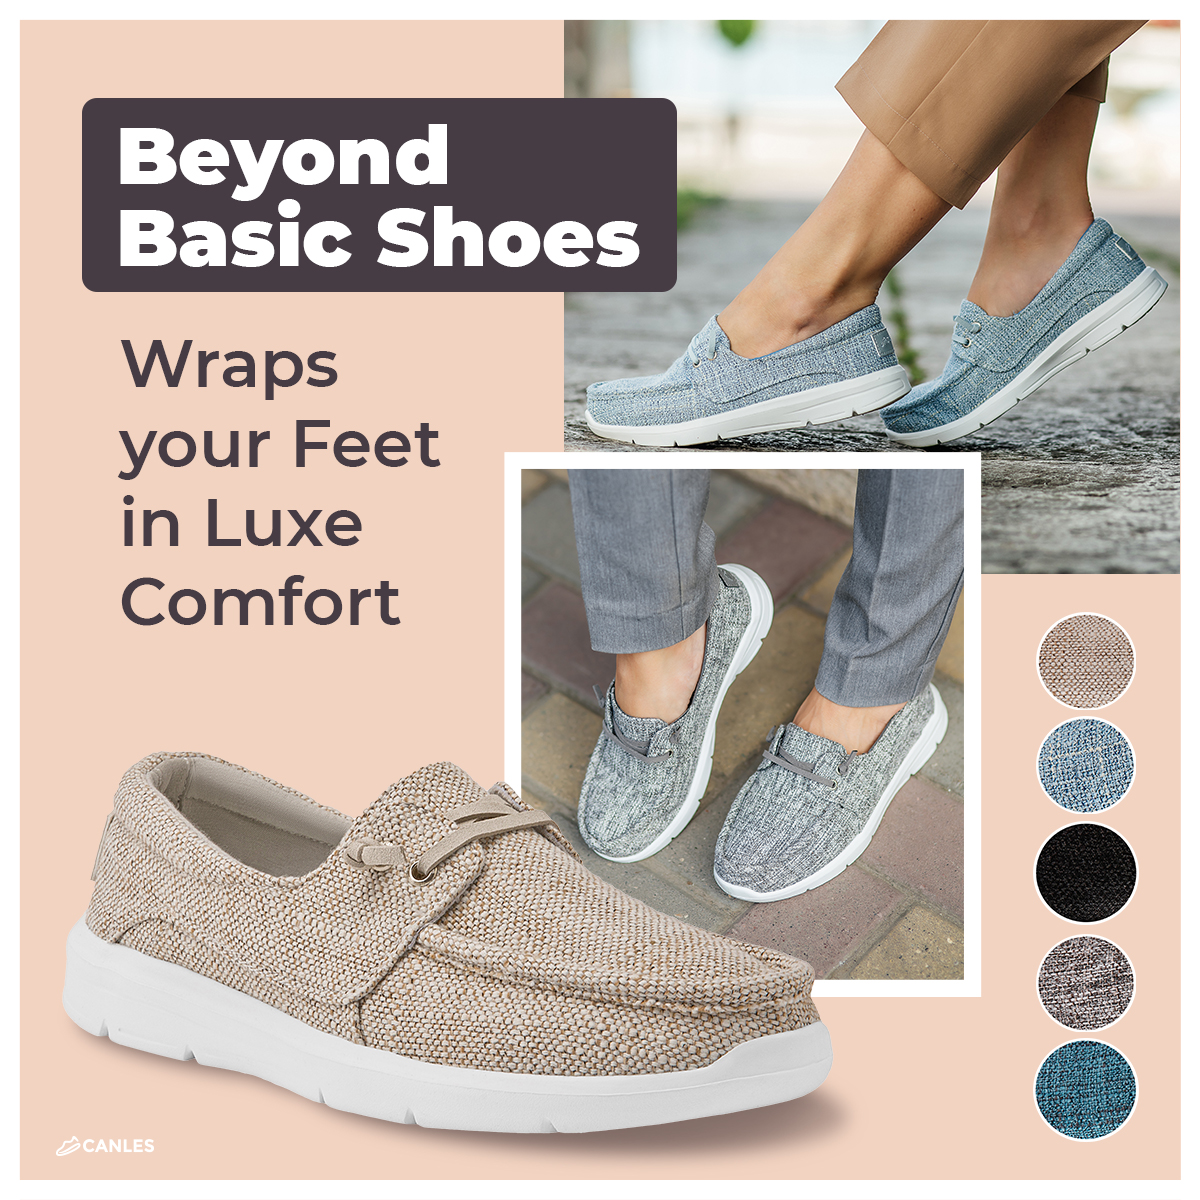 Which Canles Cerys color matches your outfit today? 🌈 Stylish, versatile, and sophisticated, these shoes are designed to complement any look. Step into fashion-forward comfort for any occasion! ✨ #CanlesCerys #StyleVersatility #FashionComfort